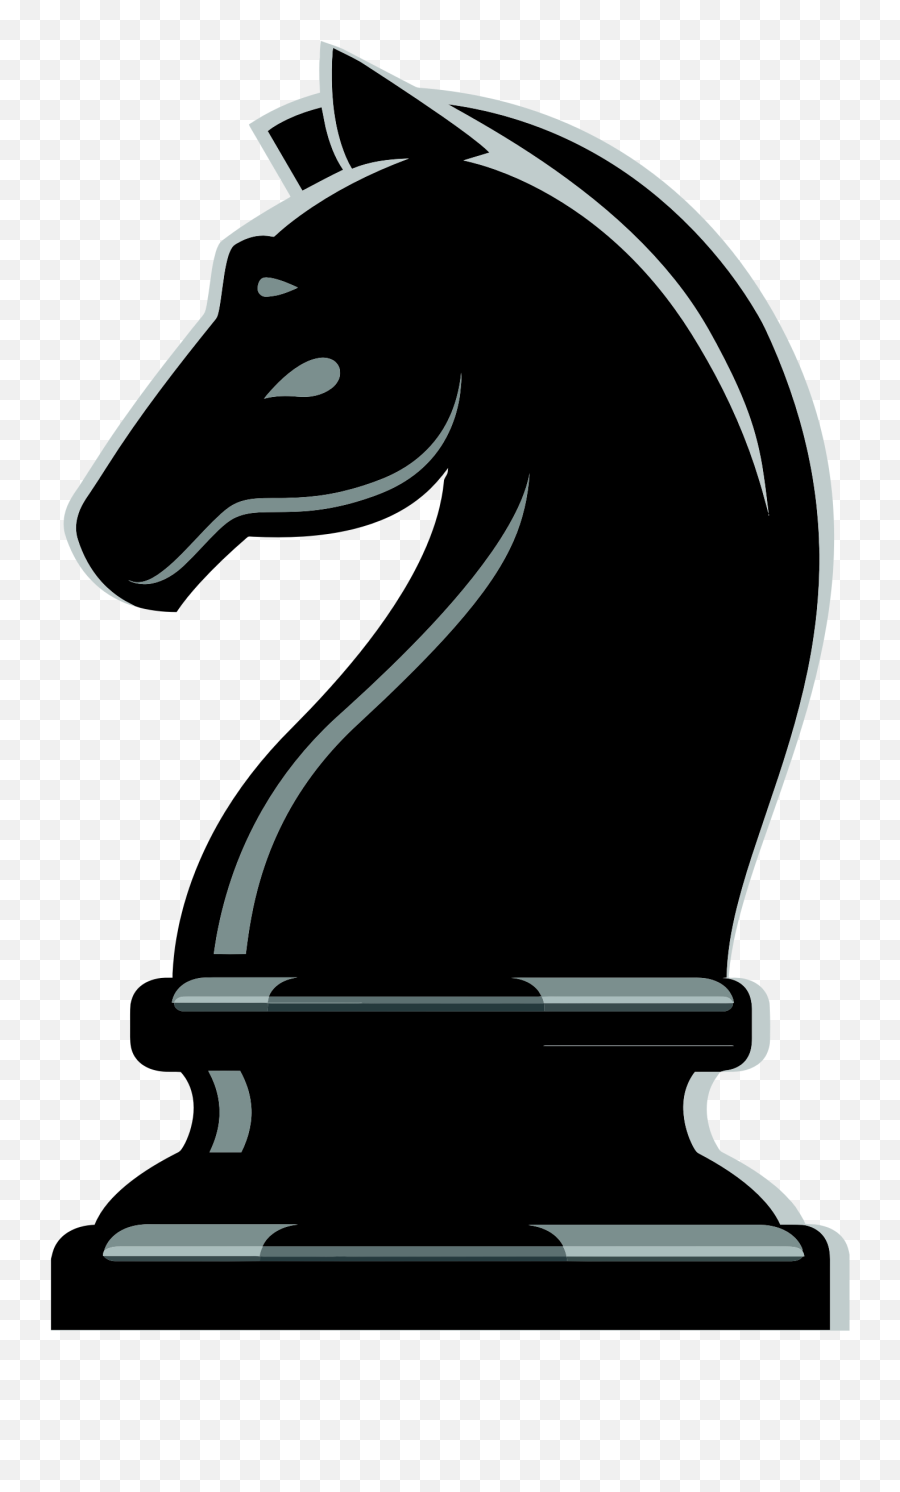 Free Knight Chess Piece Silhouette Download - Transparent Chess Knight Png,Black King Chess Icon